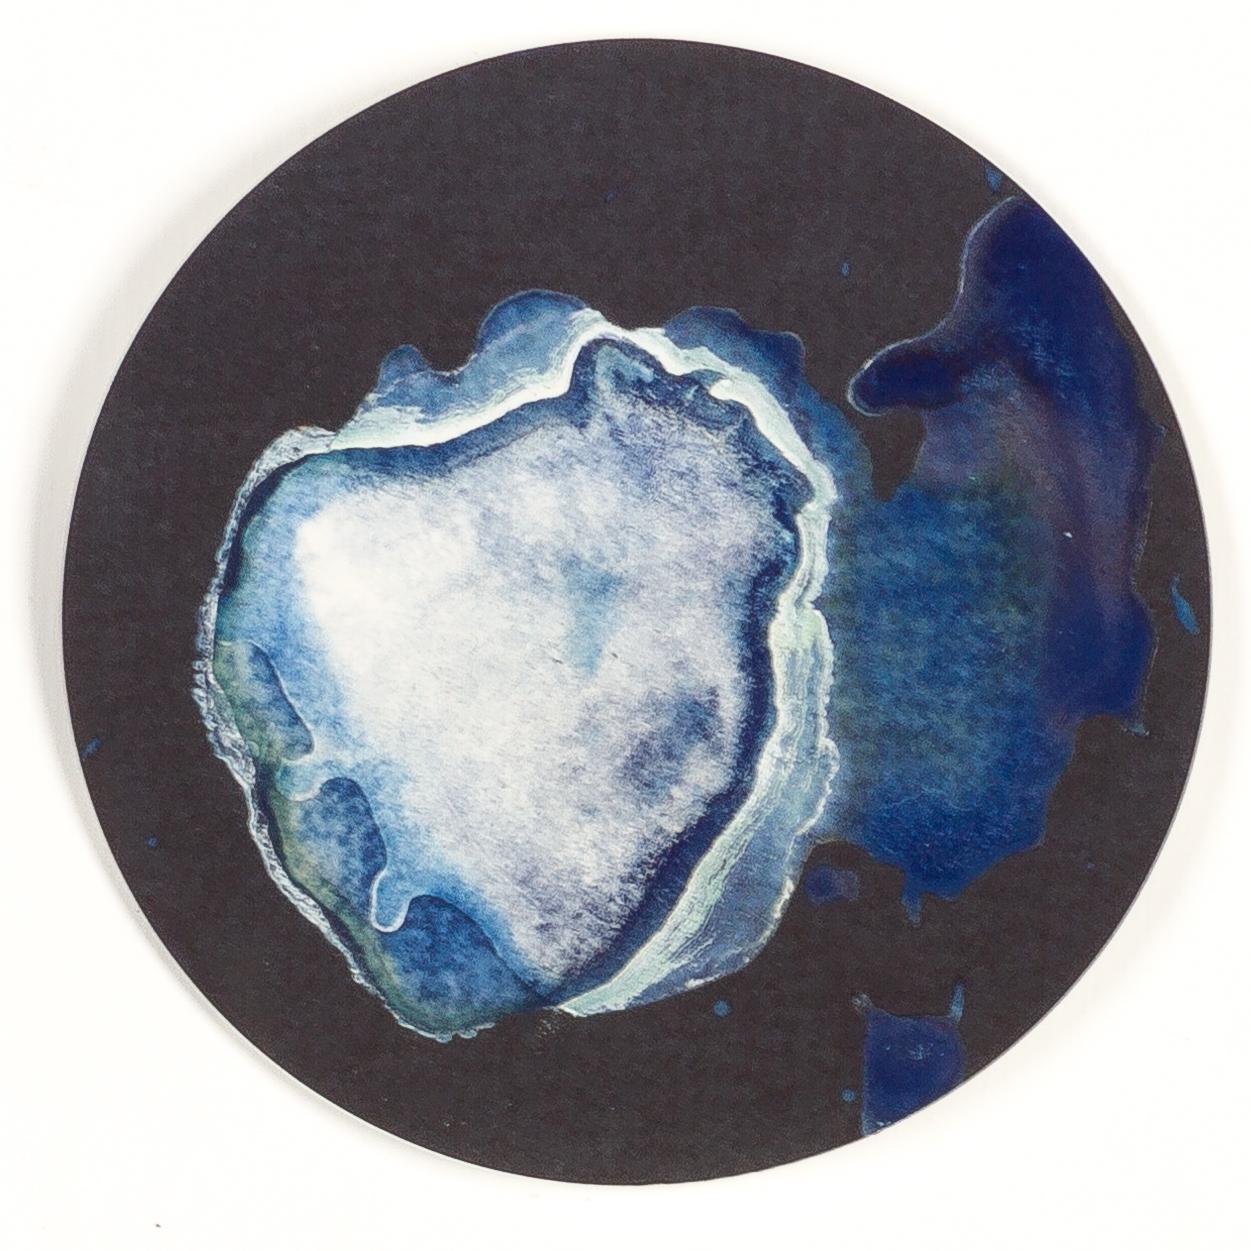 Medusas 11, 12 y 13, 2022 by Paola Davila 
From the series Mareas
Cyanotype on 300 gr cotton paper
Mounted in a high-resistance borosilicate glass petri dish
Overall size: 36 cm Dm x 12 cm H x 2.4 cm Deep.
Individual Image size: 10.5 cm D. 
Each